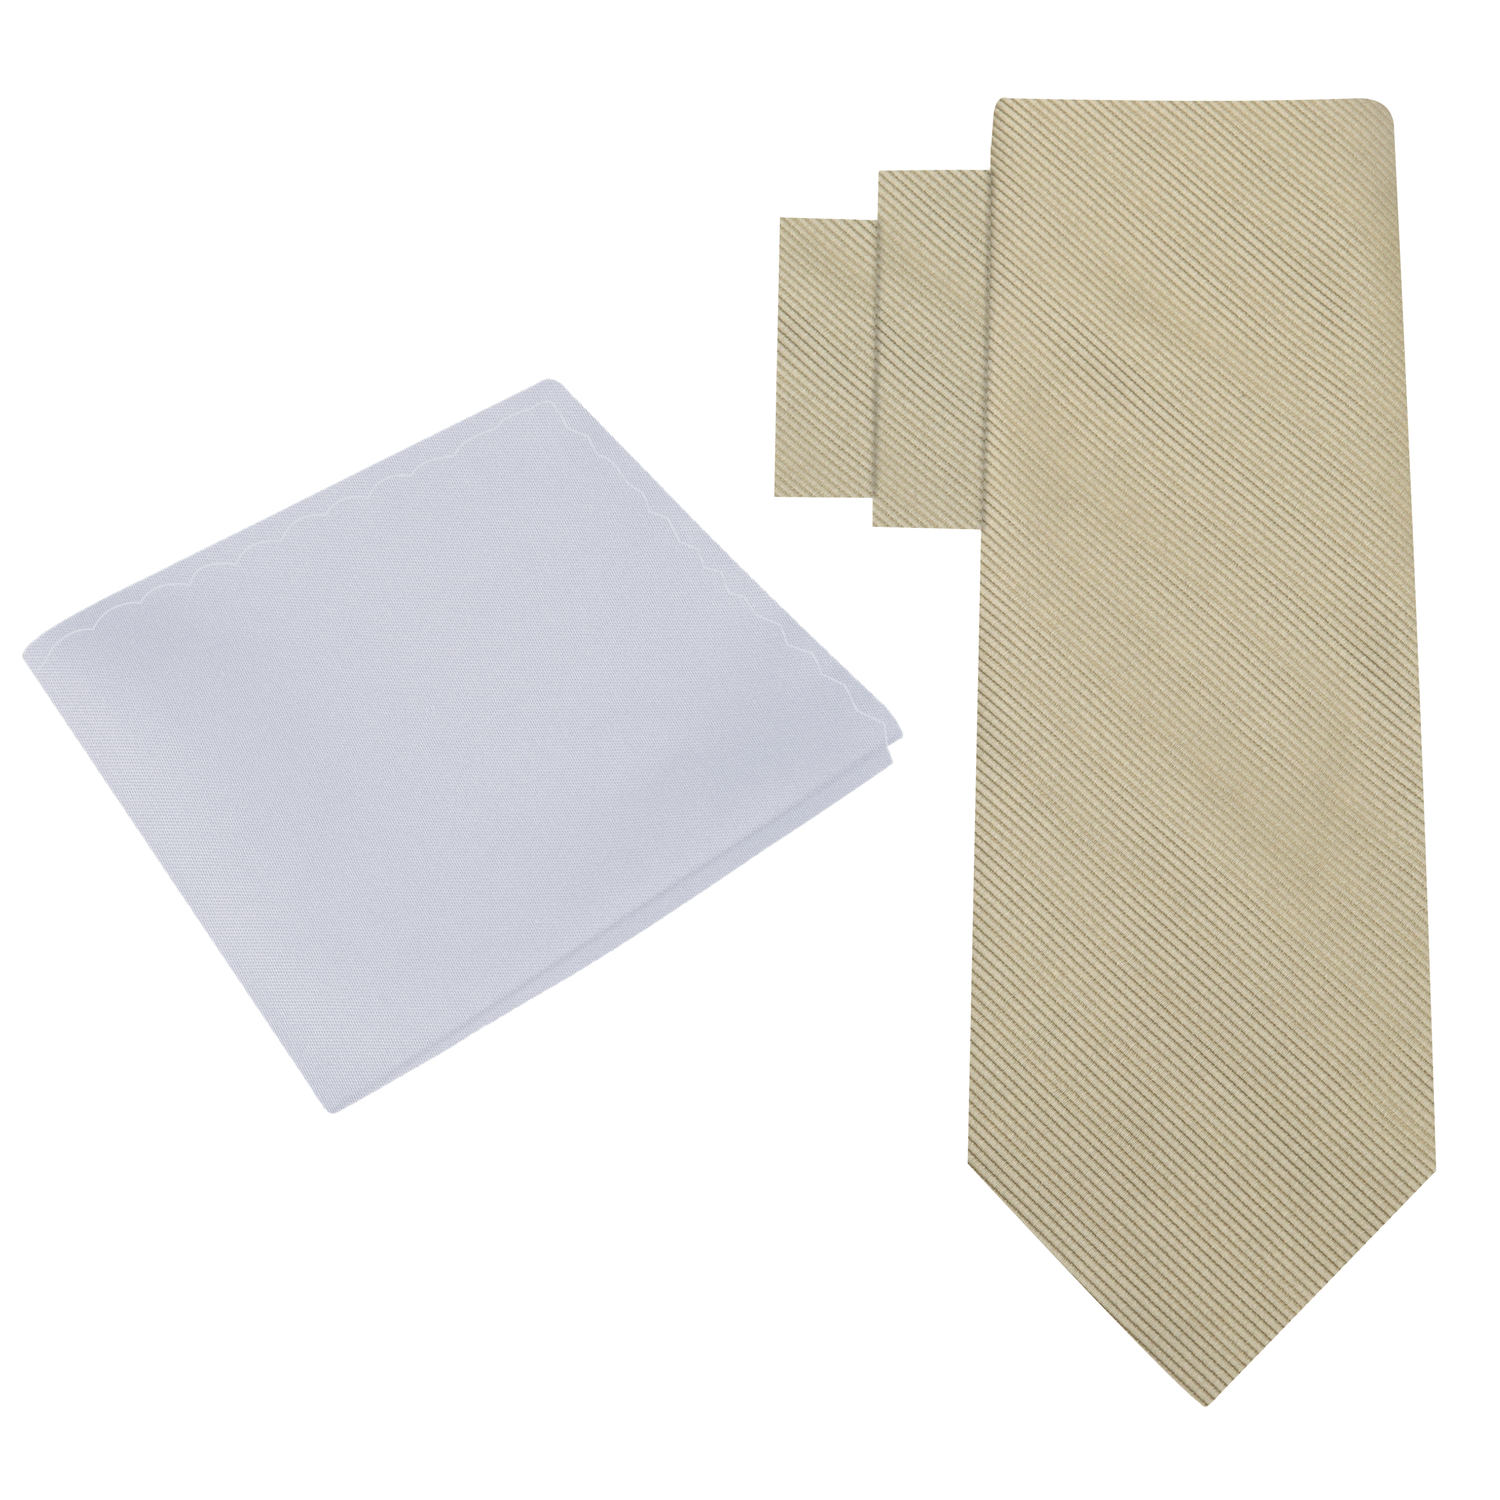 Self Tie: Solid Pale Gold Tie and Light Grey Square